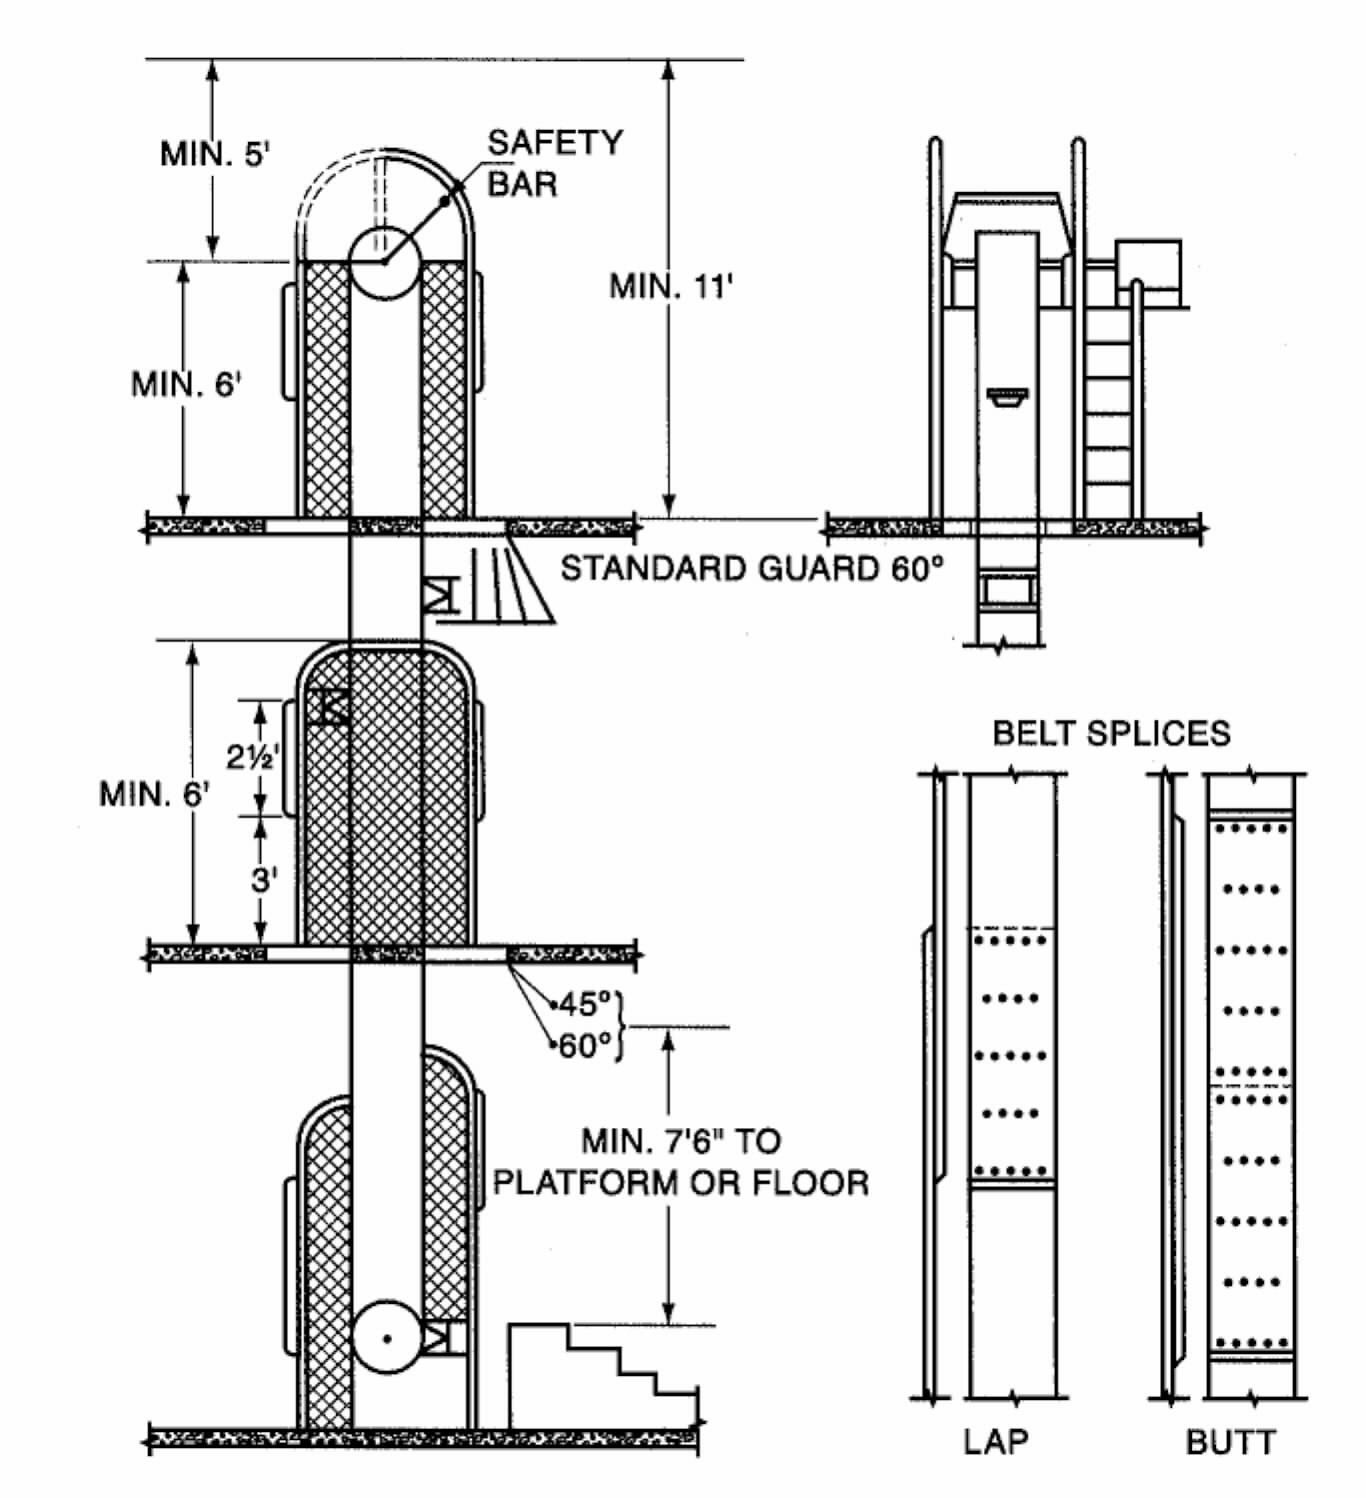 Image 2 within § 3097. Construction Requirements for Manlifts Arranged for Front Loading.